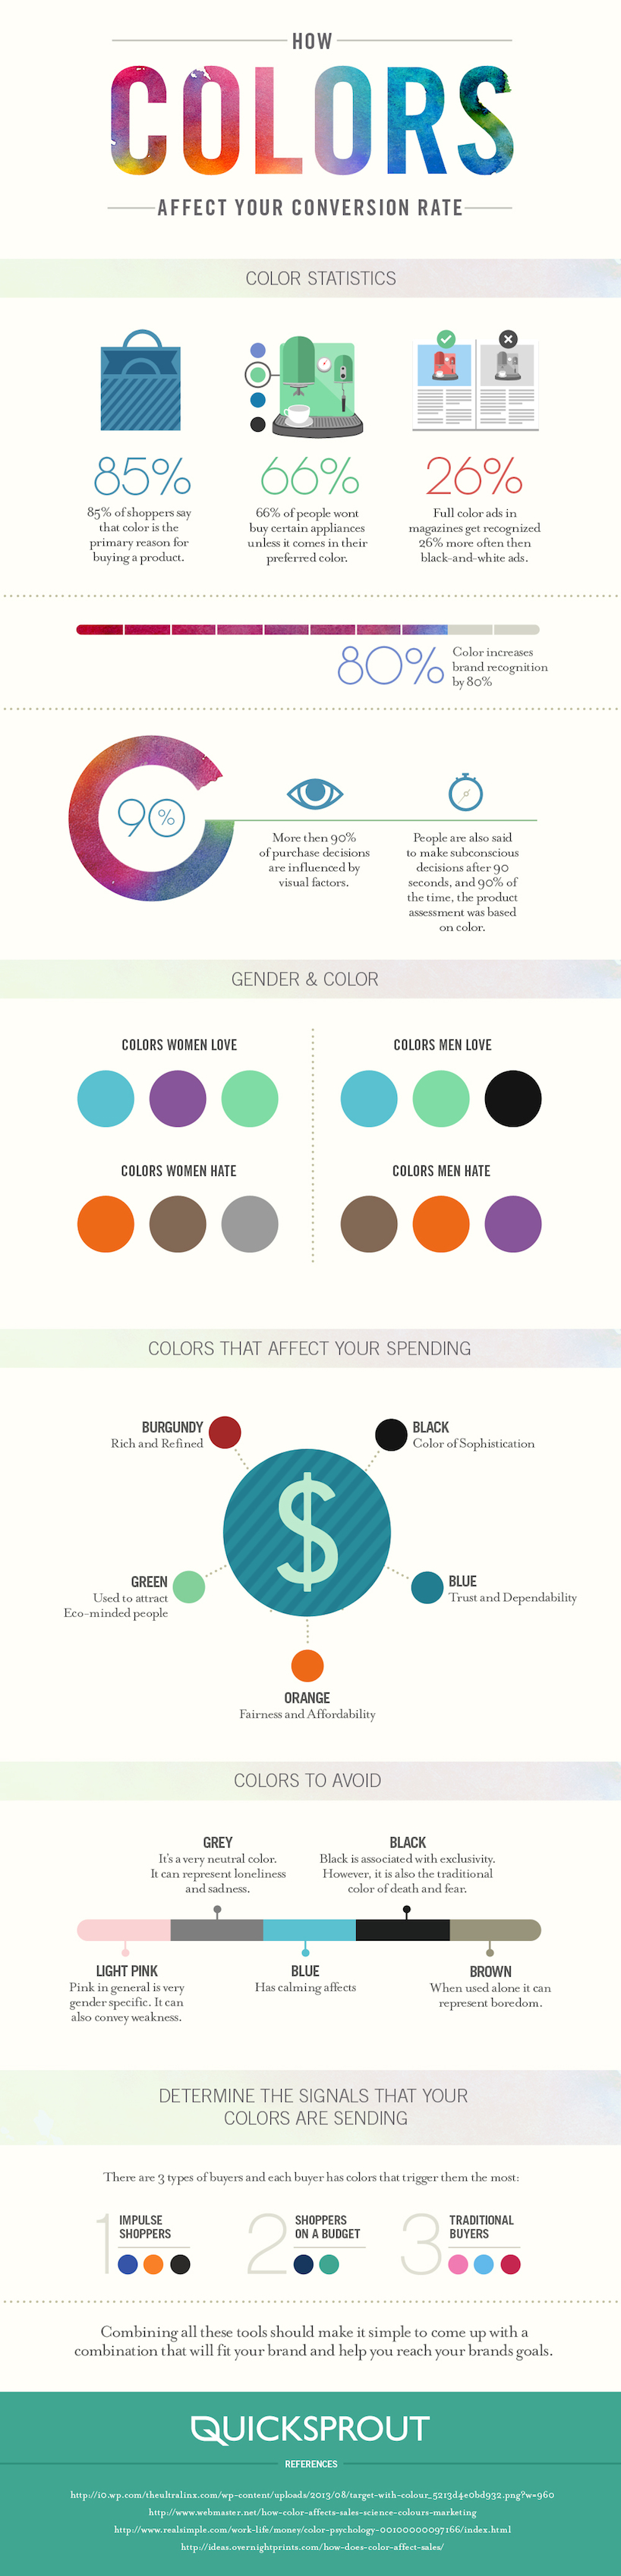 How Colors Affect Conversion Rate